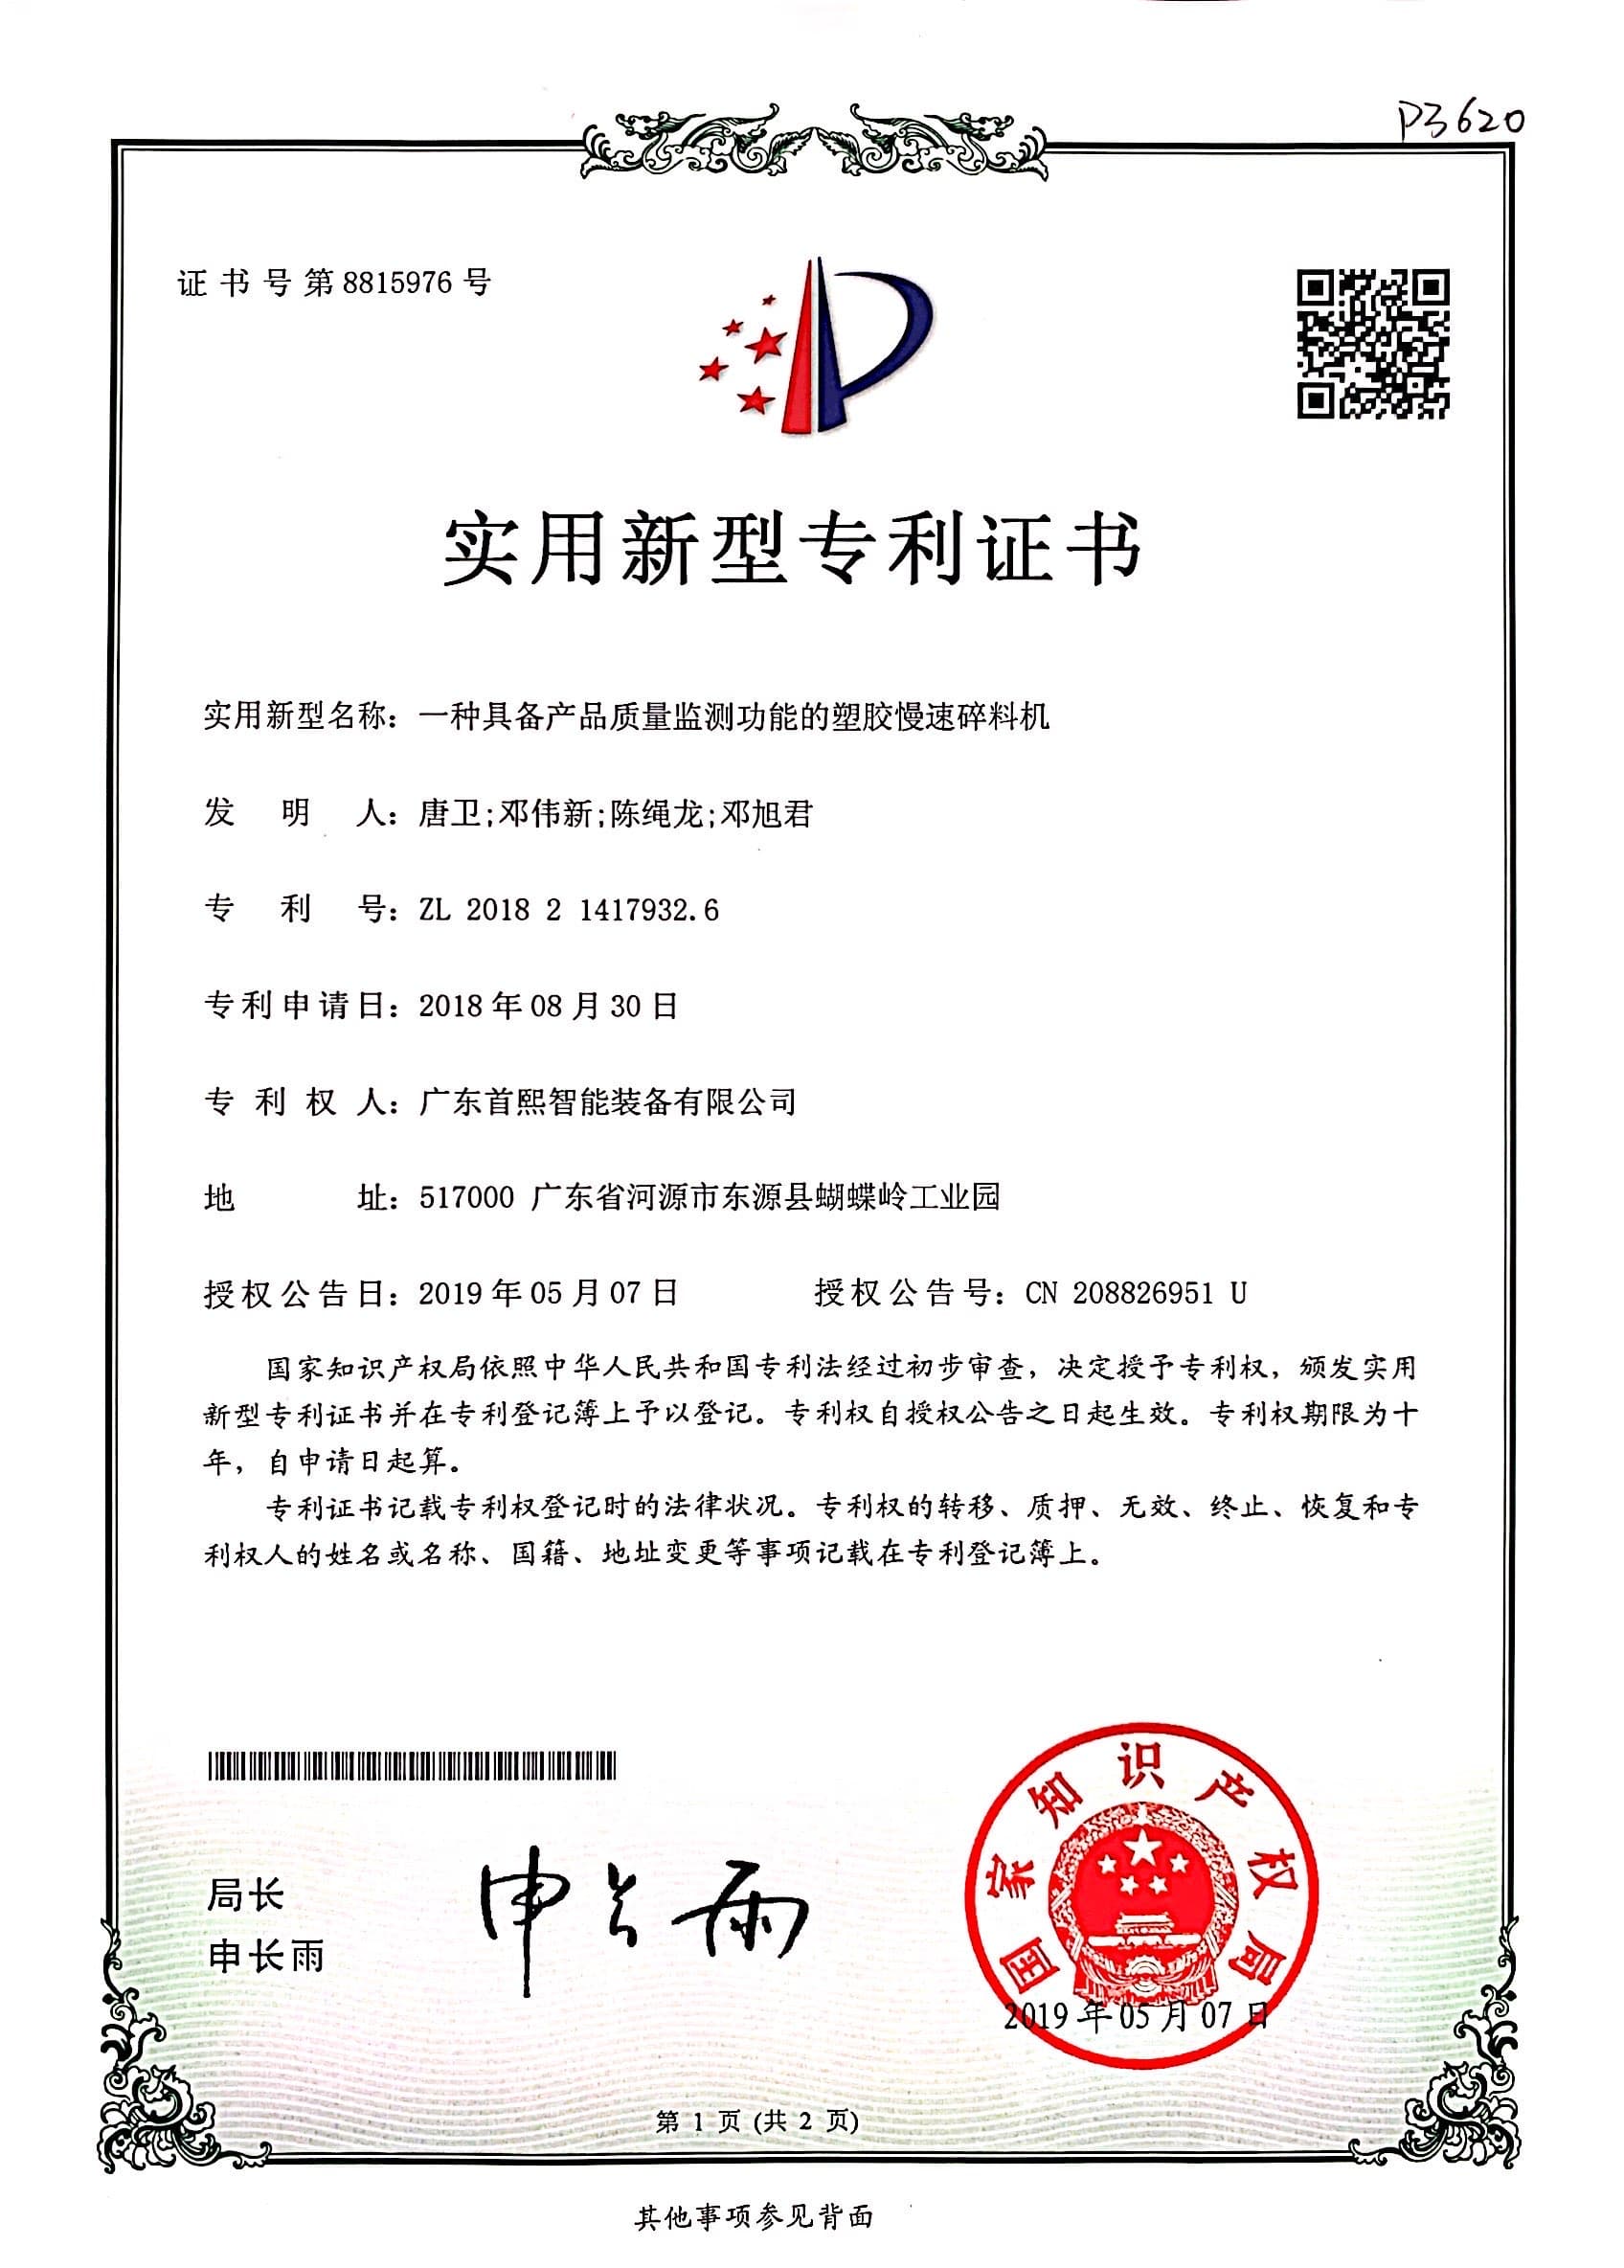 Utility Model Patent Certificate For Plastic Crusher